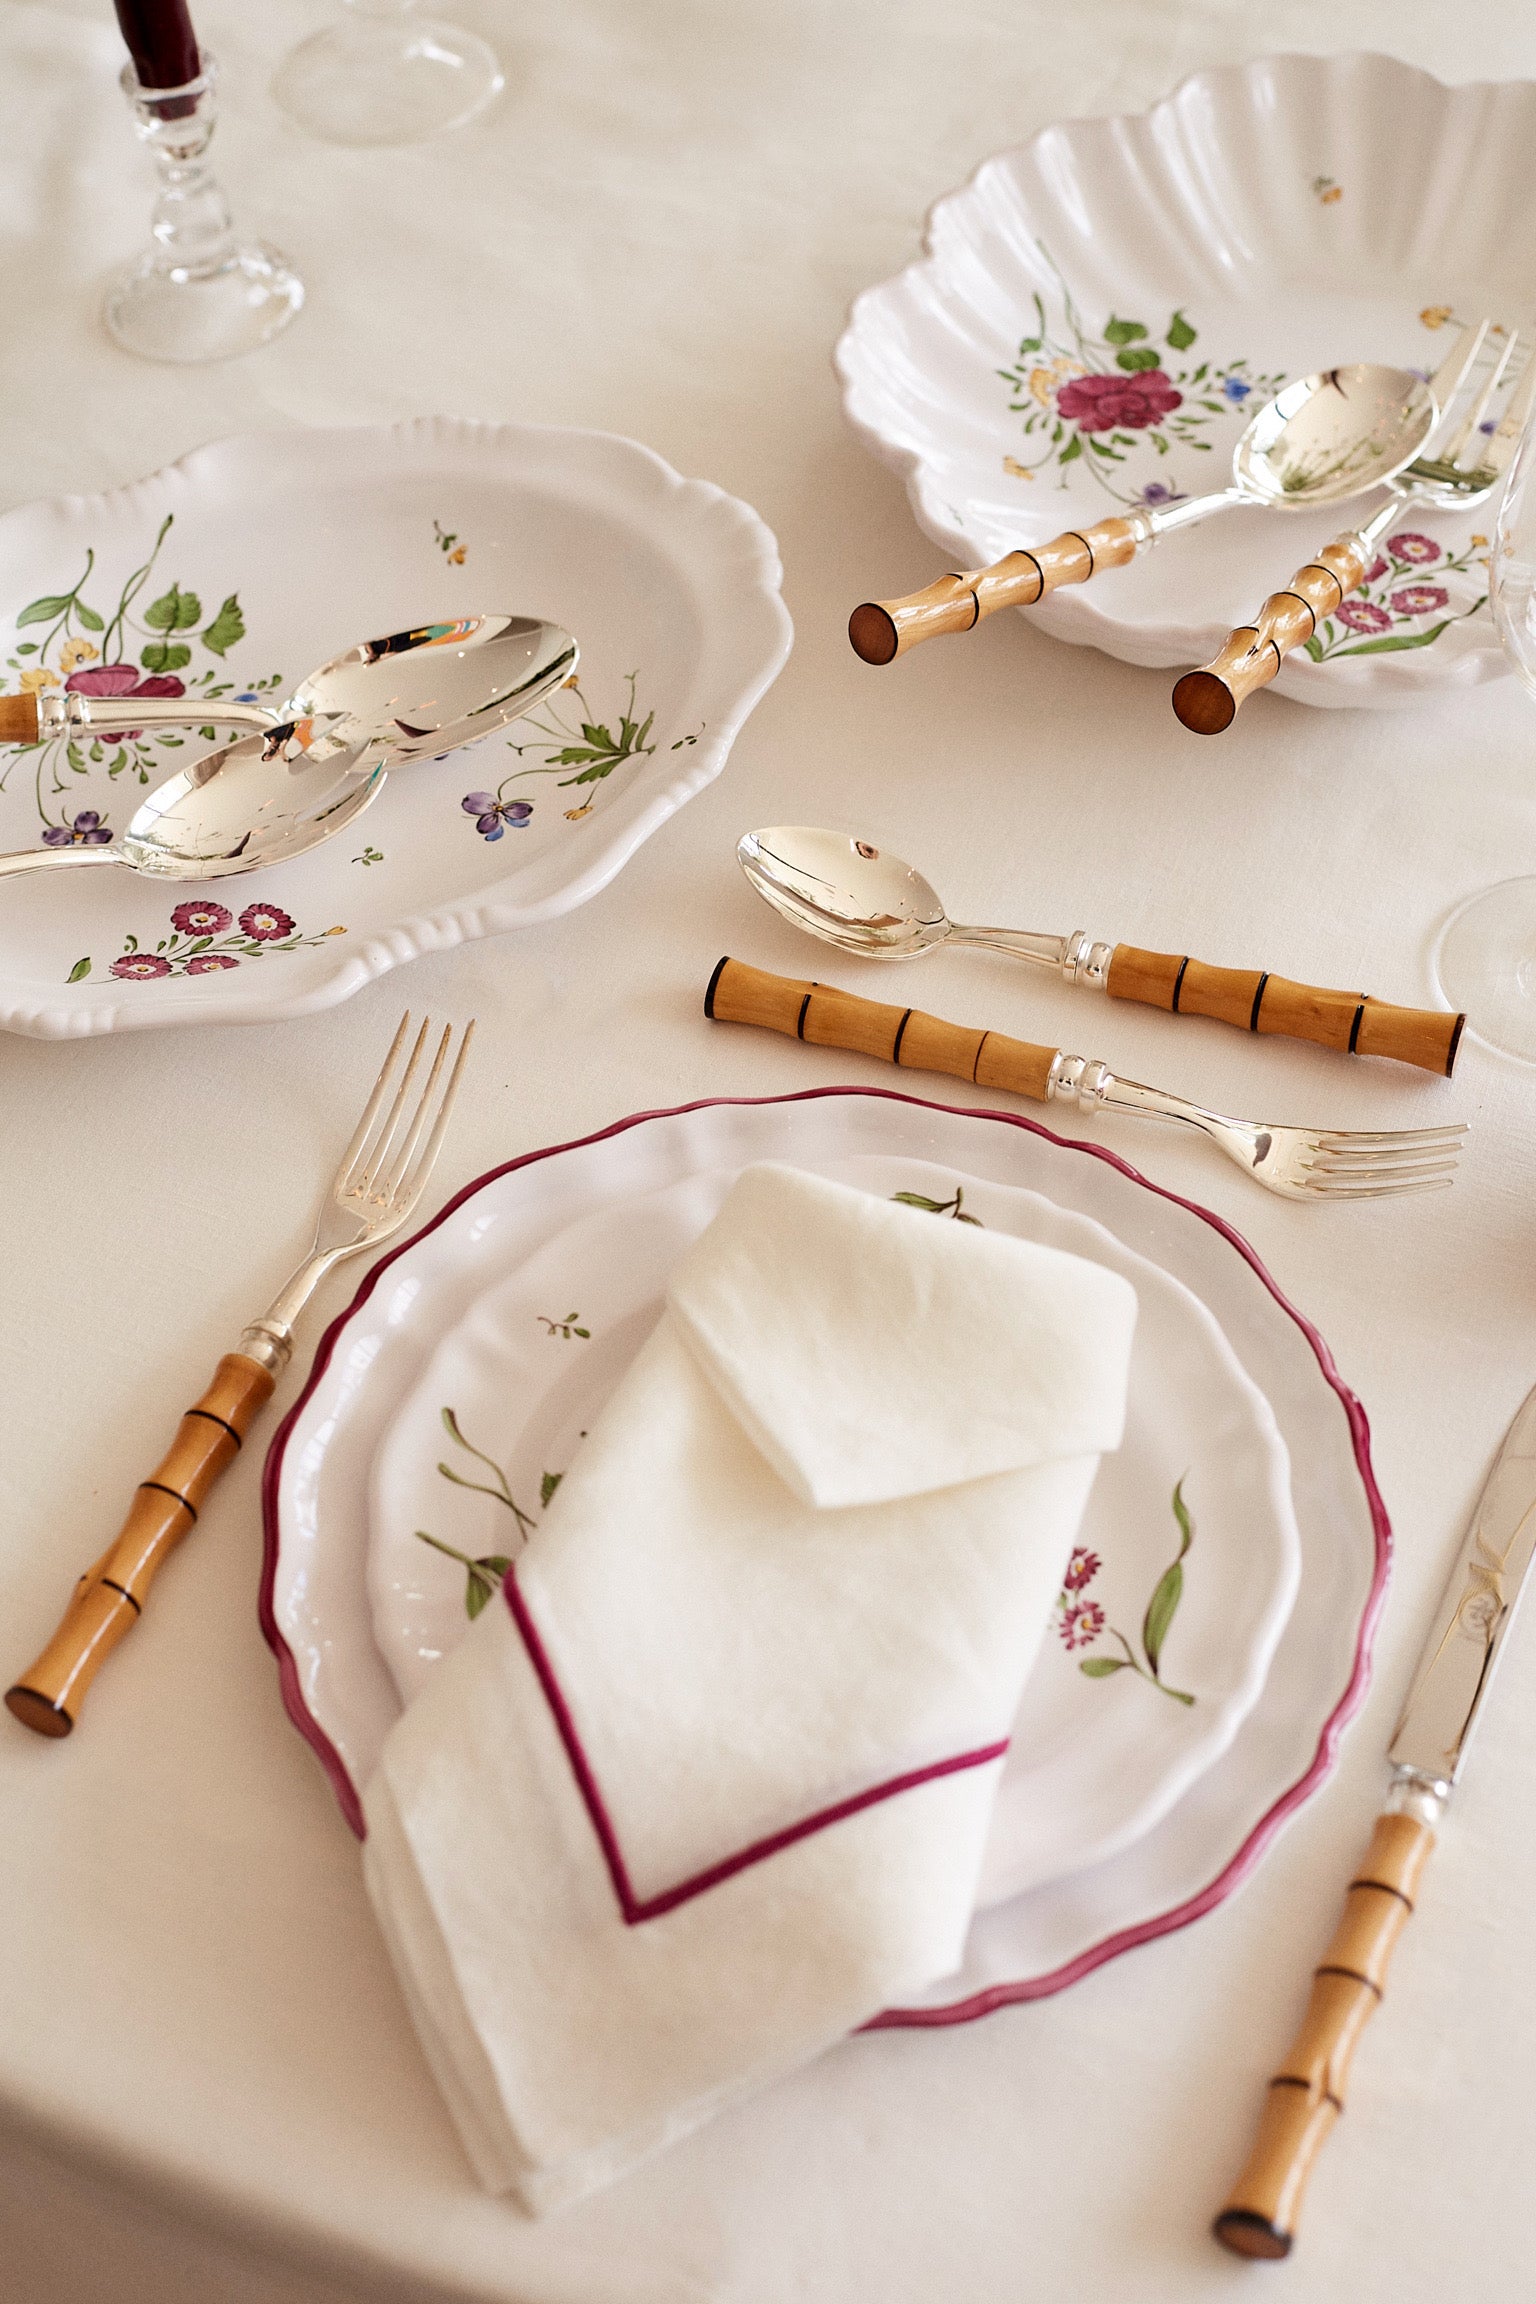 table setting styled with Banyan Silver Plated Salad Serving Set Carved in the Style of Bamboo